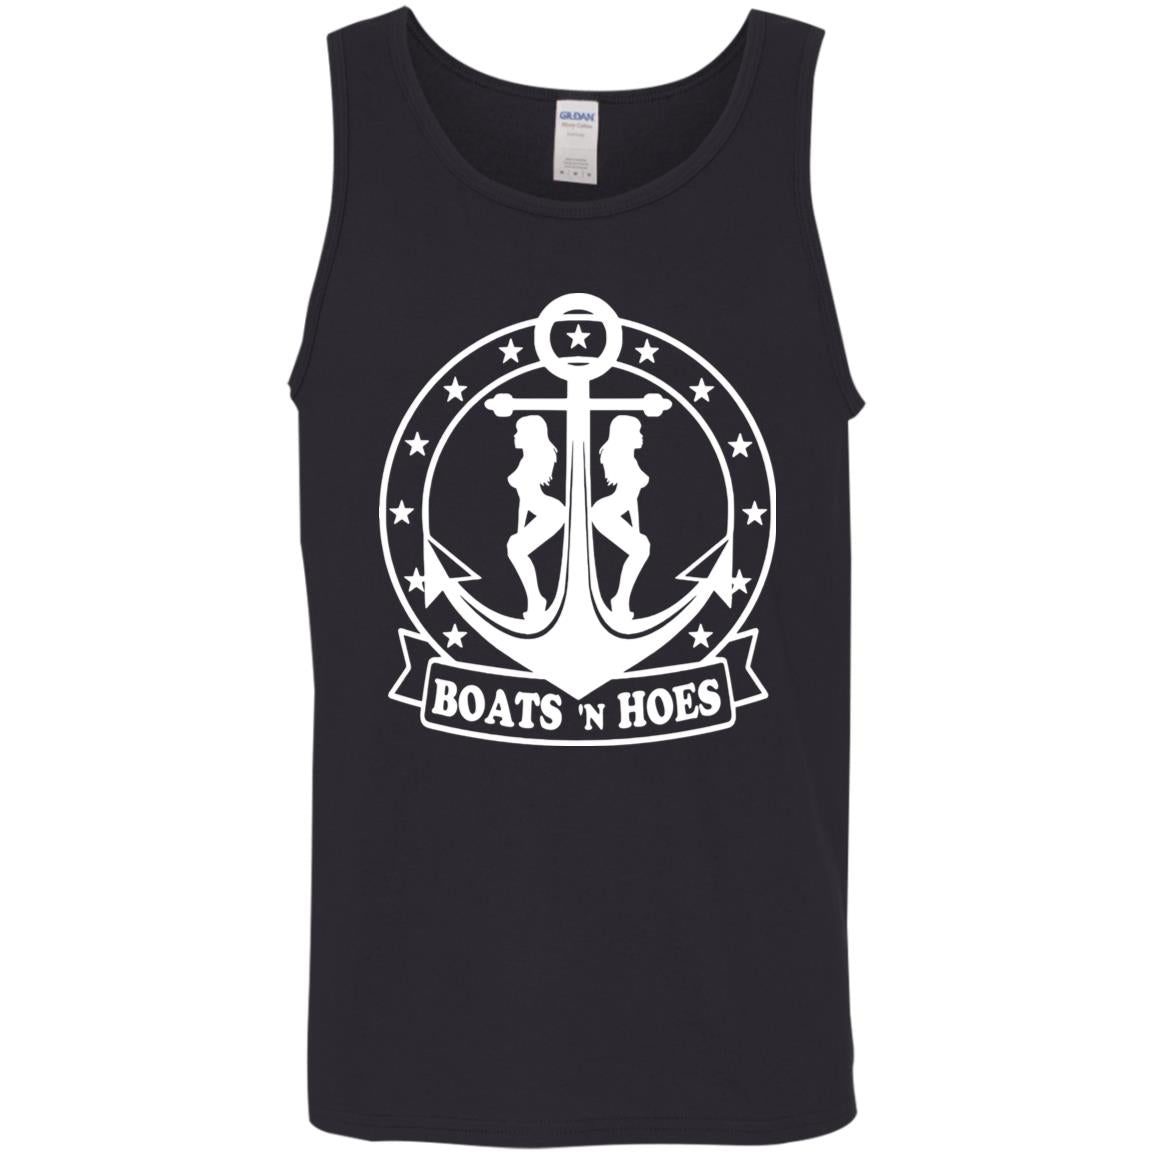 HRCL FL - Boats N Hoes - 2 Sided G520 Cotton Tank Top 5.3 oz.